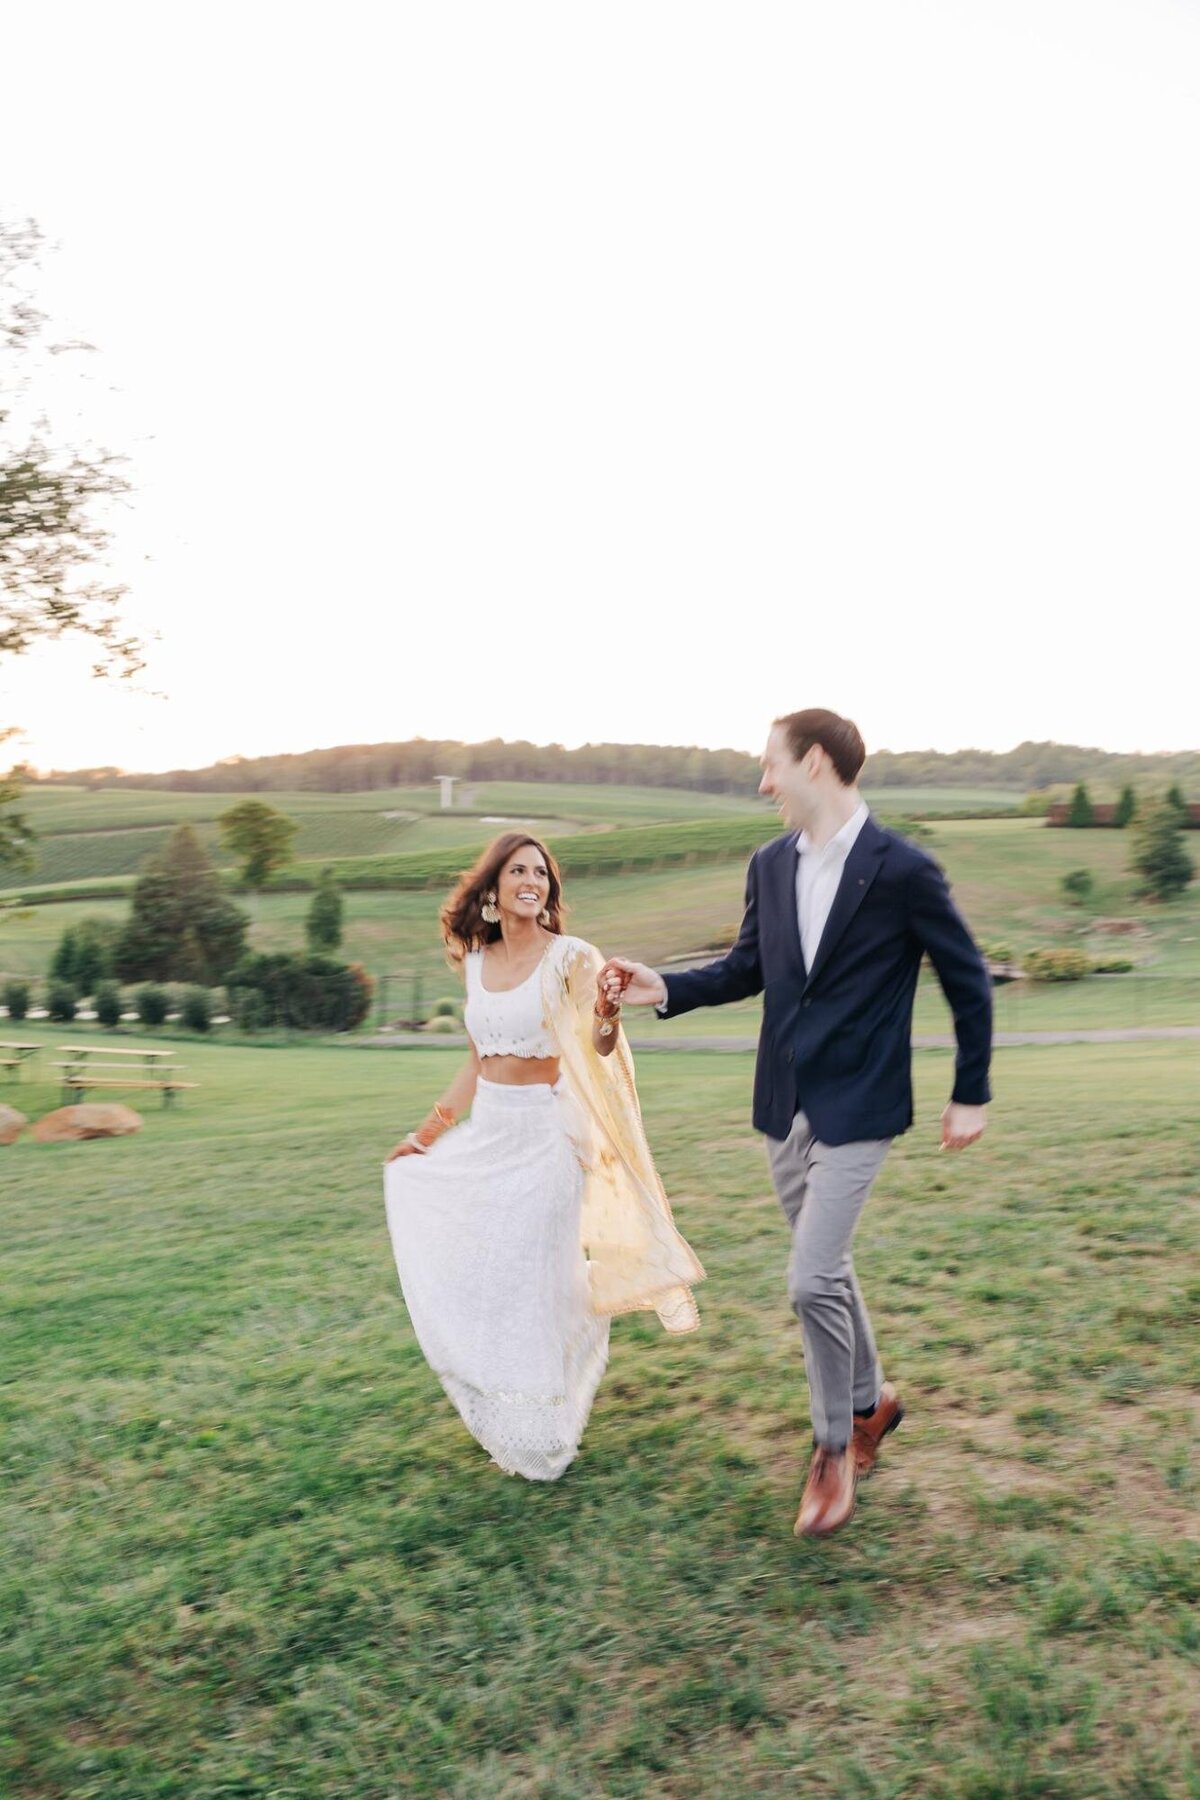 A joyful bride and groom holding hands and running across a grassy field with a serene landscape in the background.